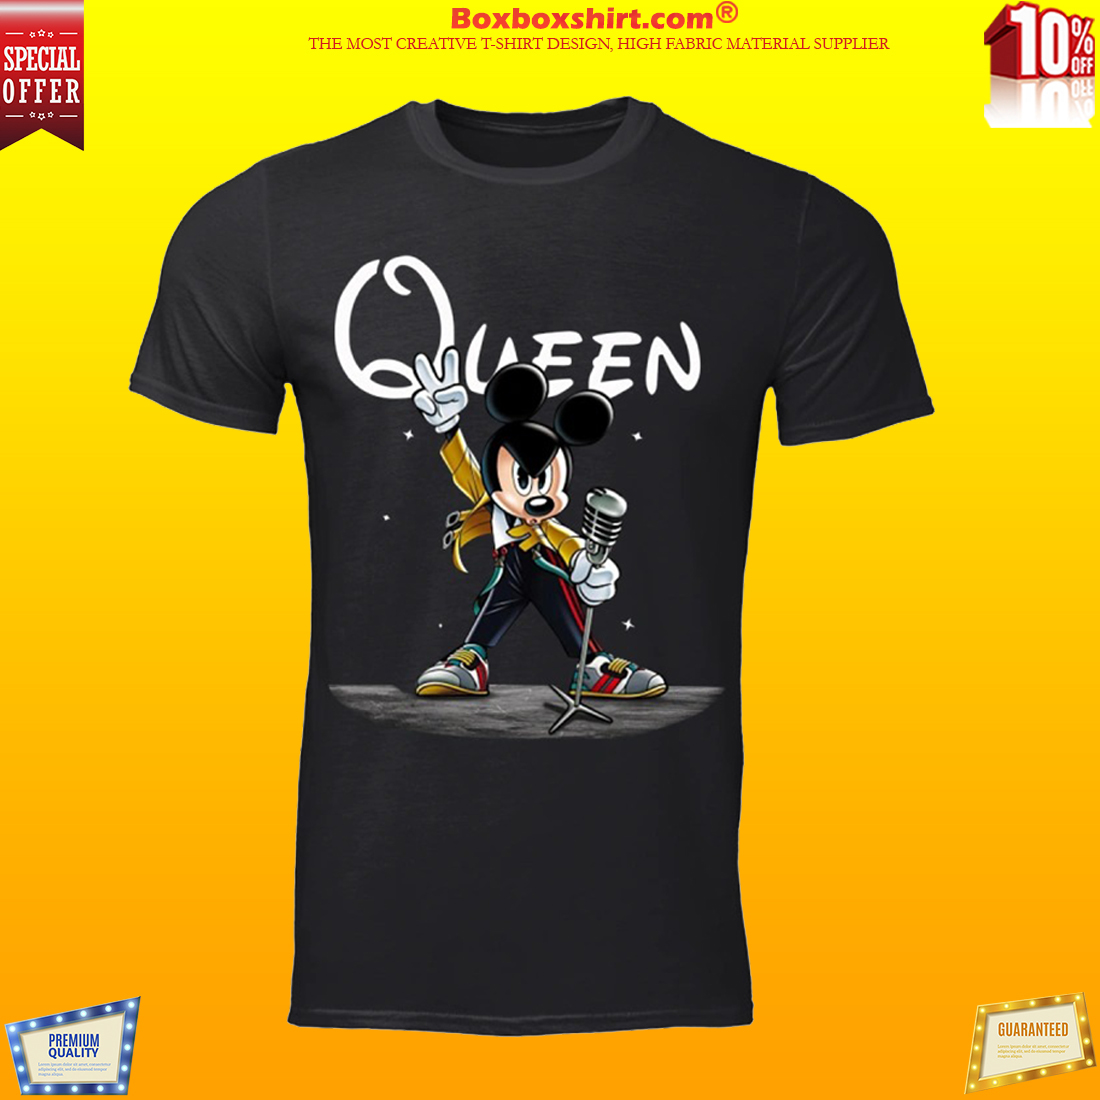 Queen Mickey mouse singing shirt and T-shirt